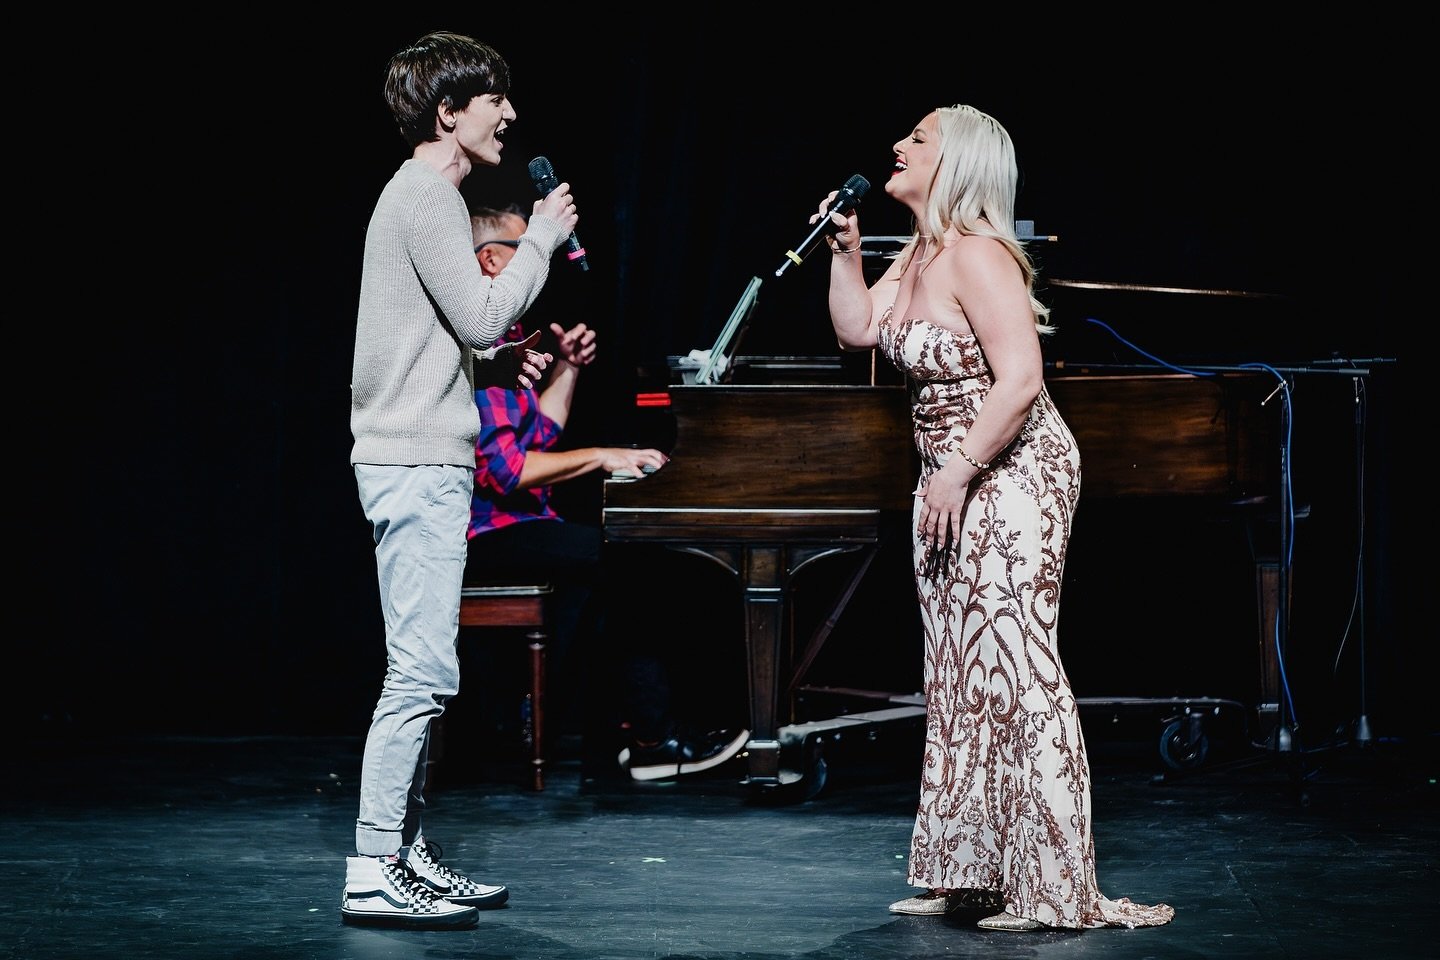 On April 27, we embarked on hosting our first benefit concert called &ldquo;Songs That Make You Unbreakable,&rdquo; aiming to raise funds for our scholarship initiative benefiting students impacted by gun violence. Various singers graced the stage, s